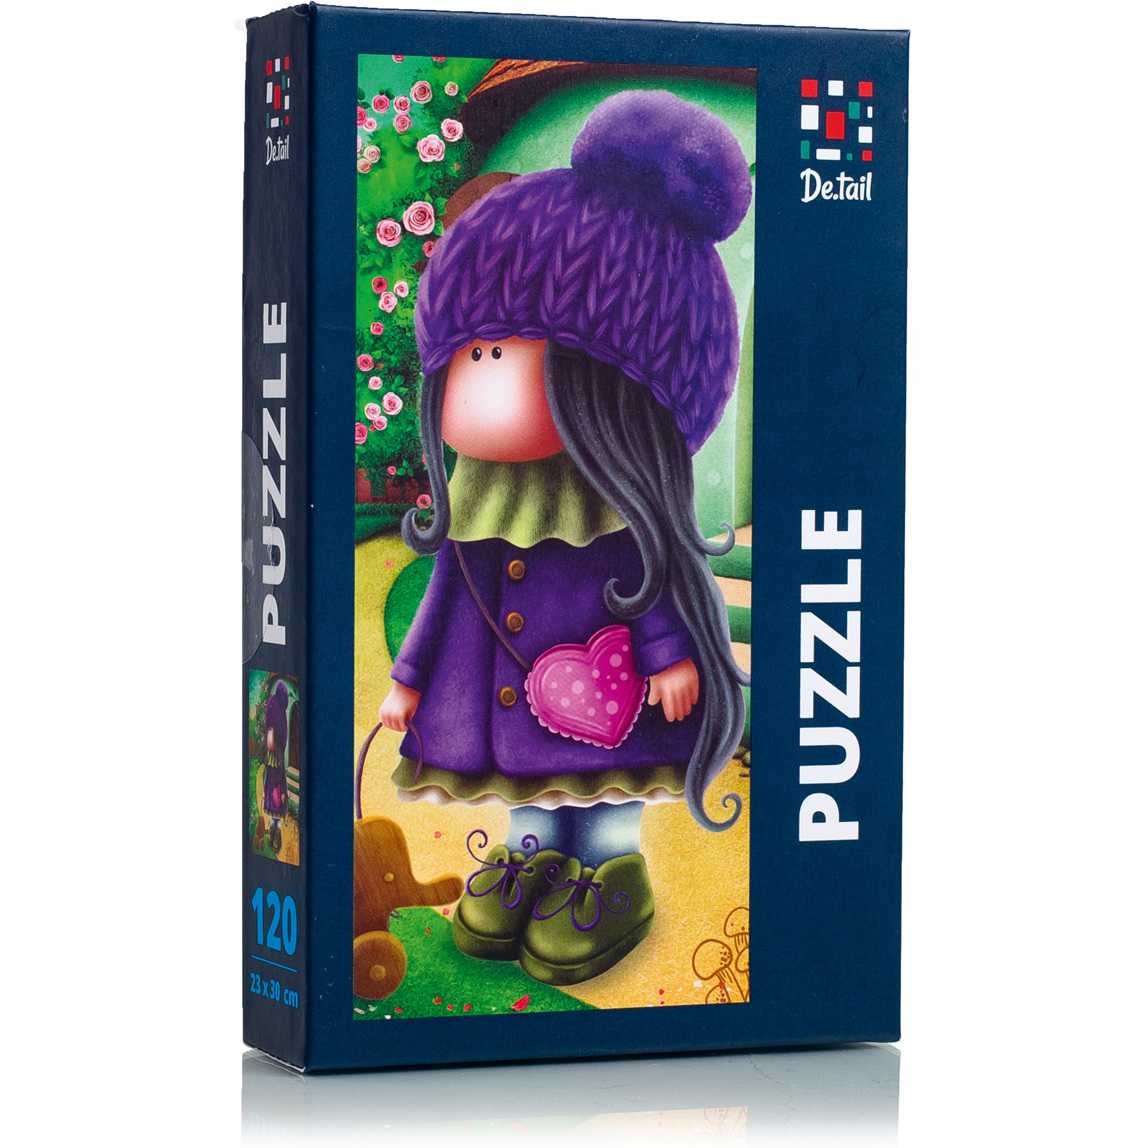 Puzzle Cute doll with an elephant, 23x30 cm, 120 piese De.tail DT100-04